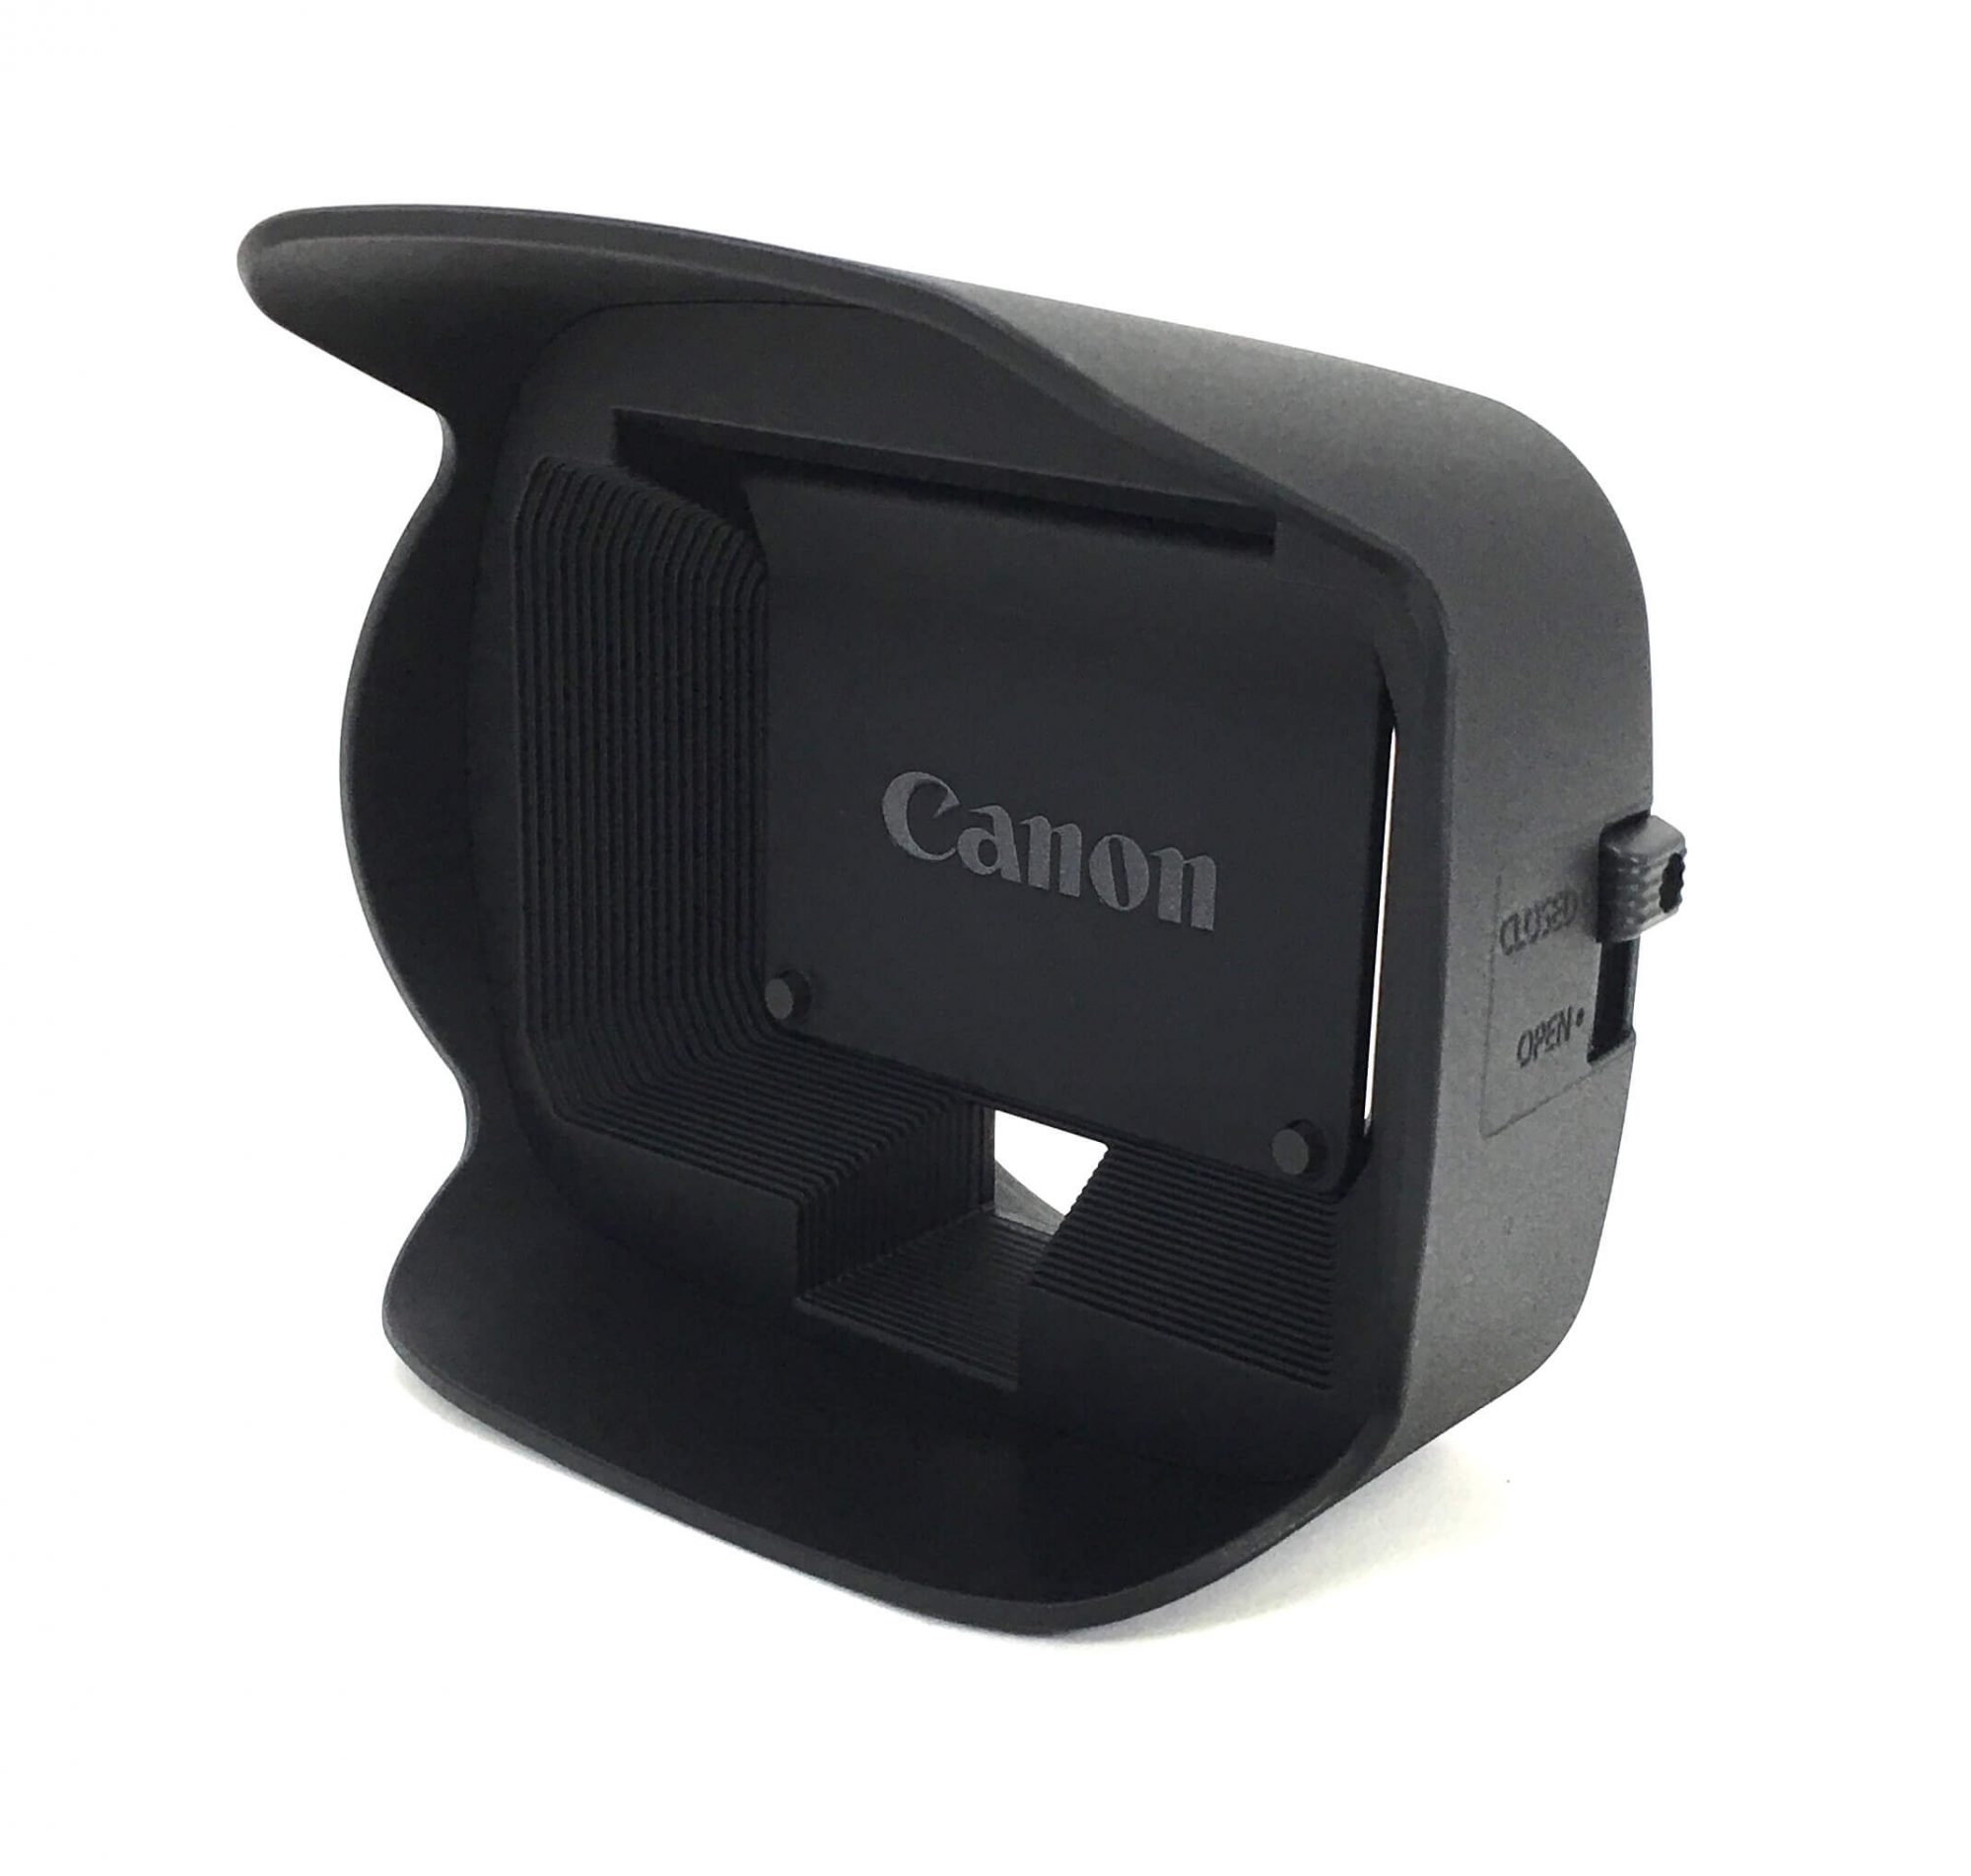 Original Lens Hood that fits on the the Canon XA25 camcorder. It is a genuine Canon part, sourced directly from Canon USA. Brand new factory fresh. Free Shipping.